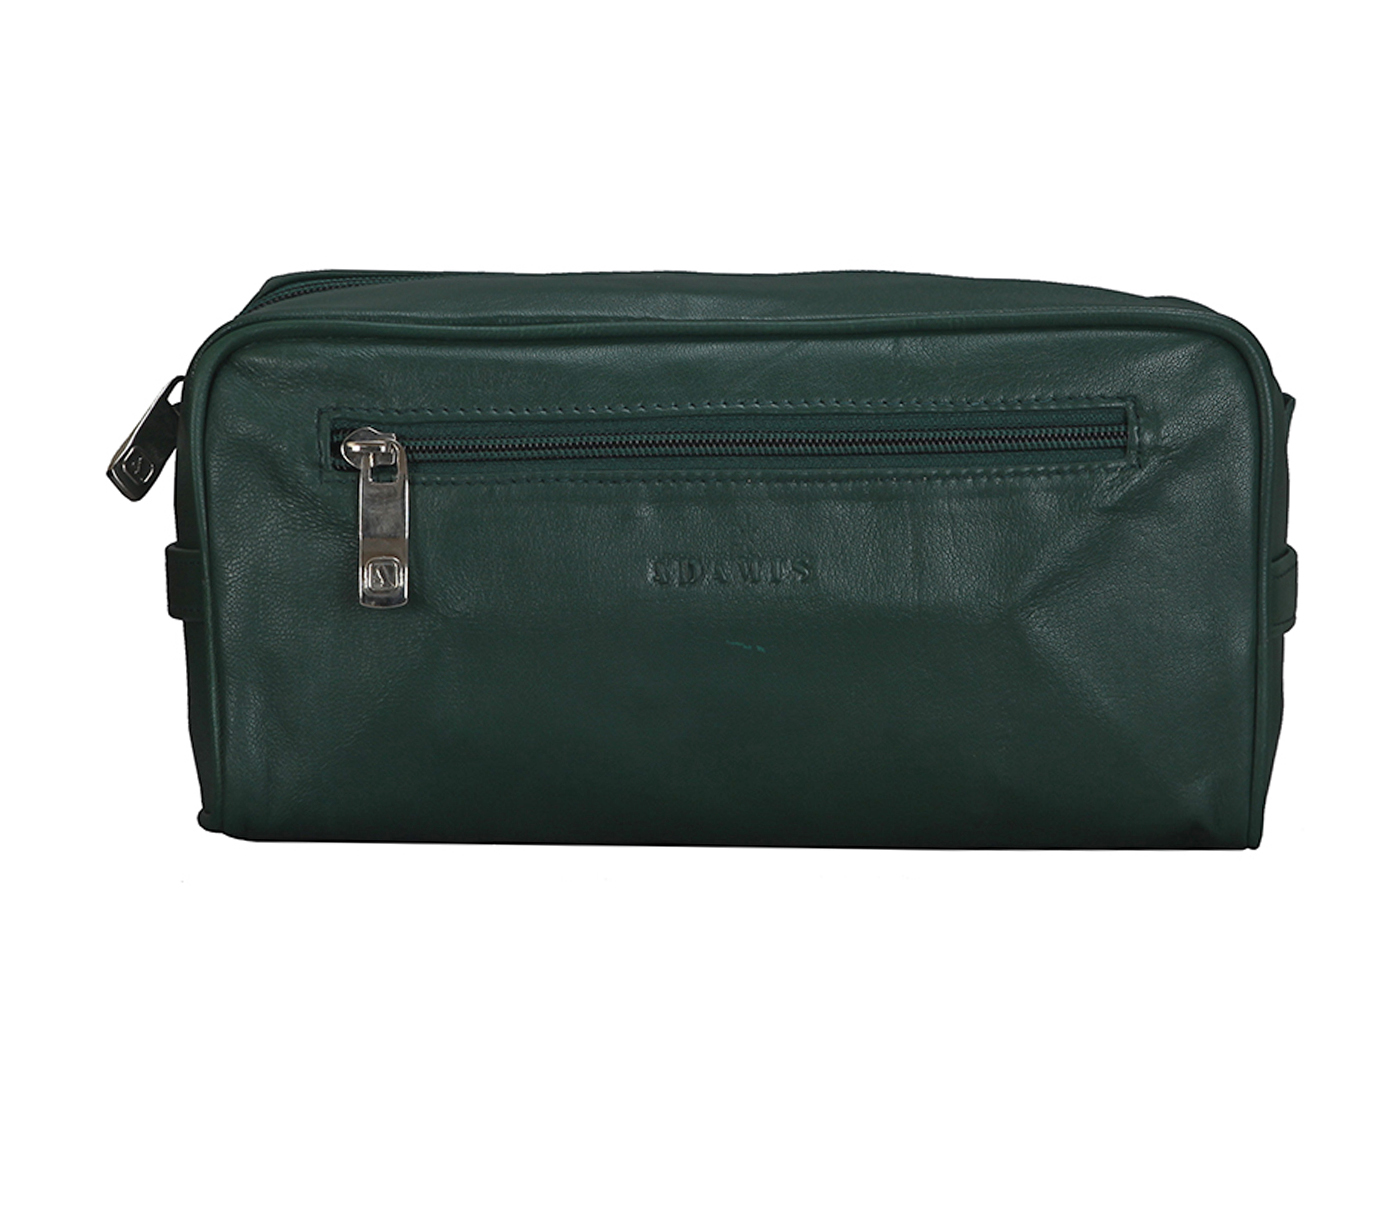 Travel Essential--Unisex Wash & Toiletry travel Bag in Genuine Leather - Green